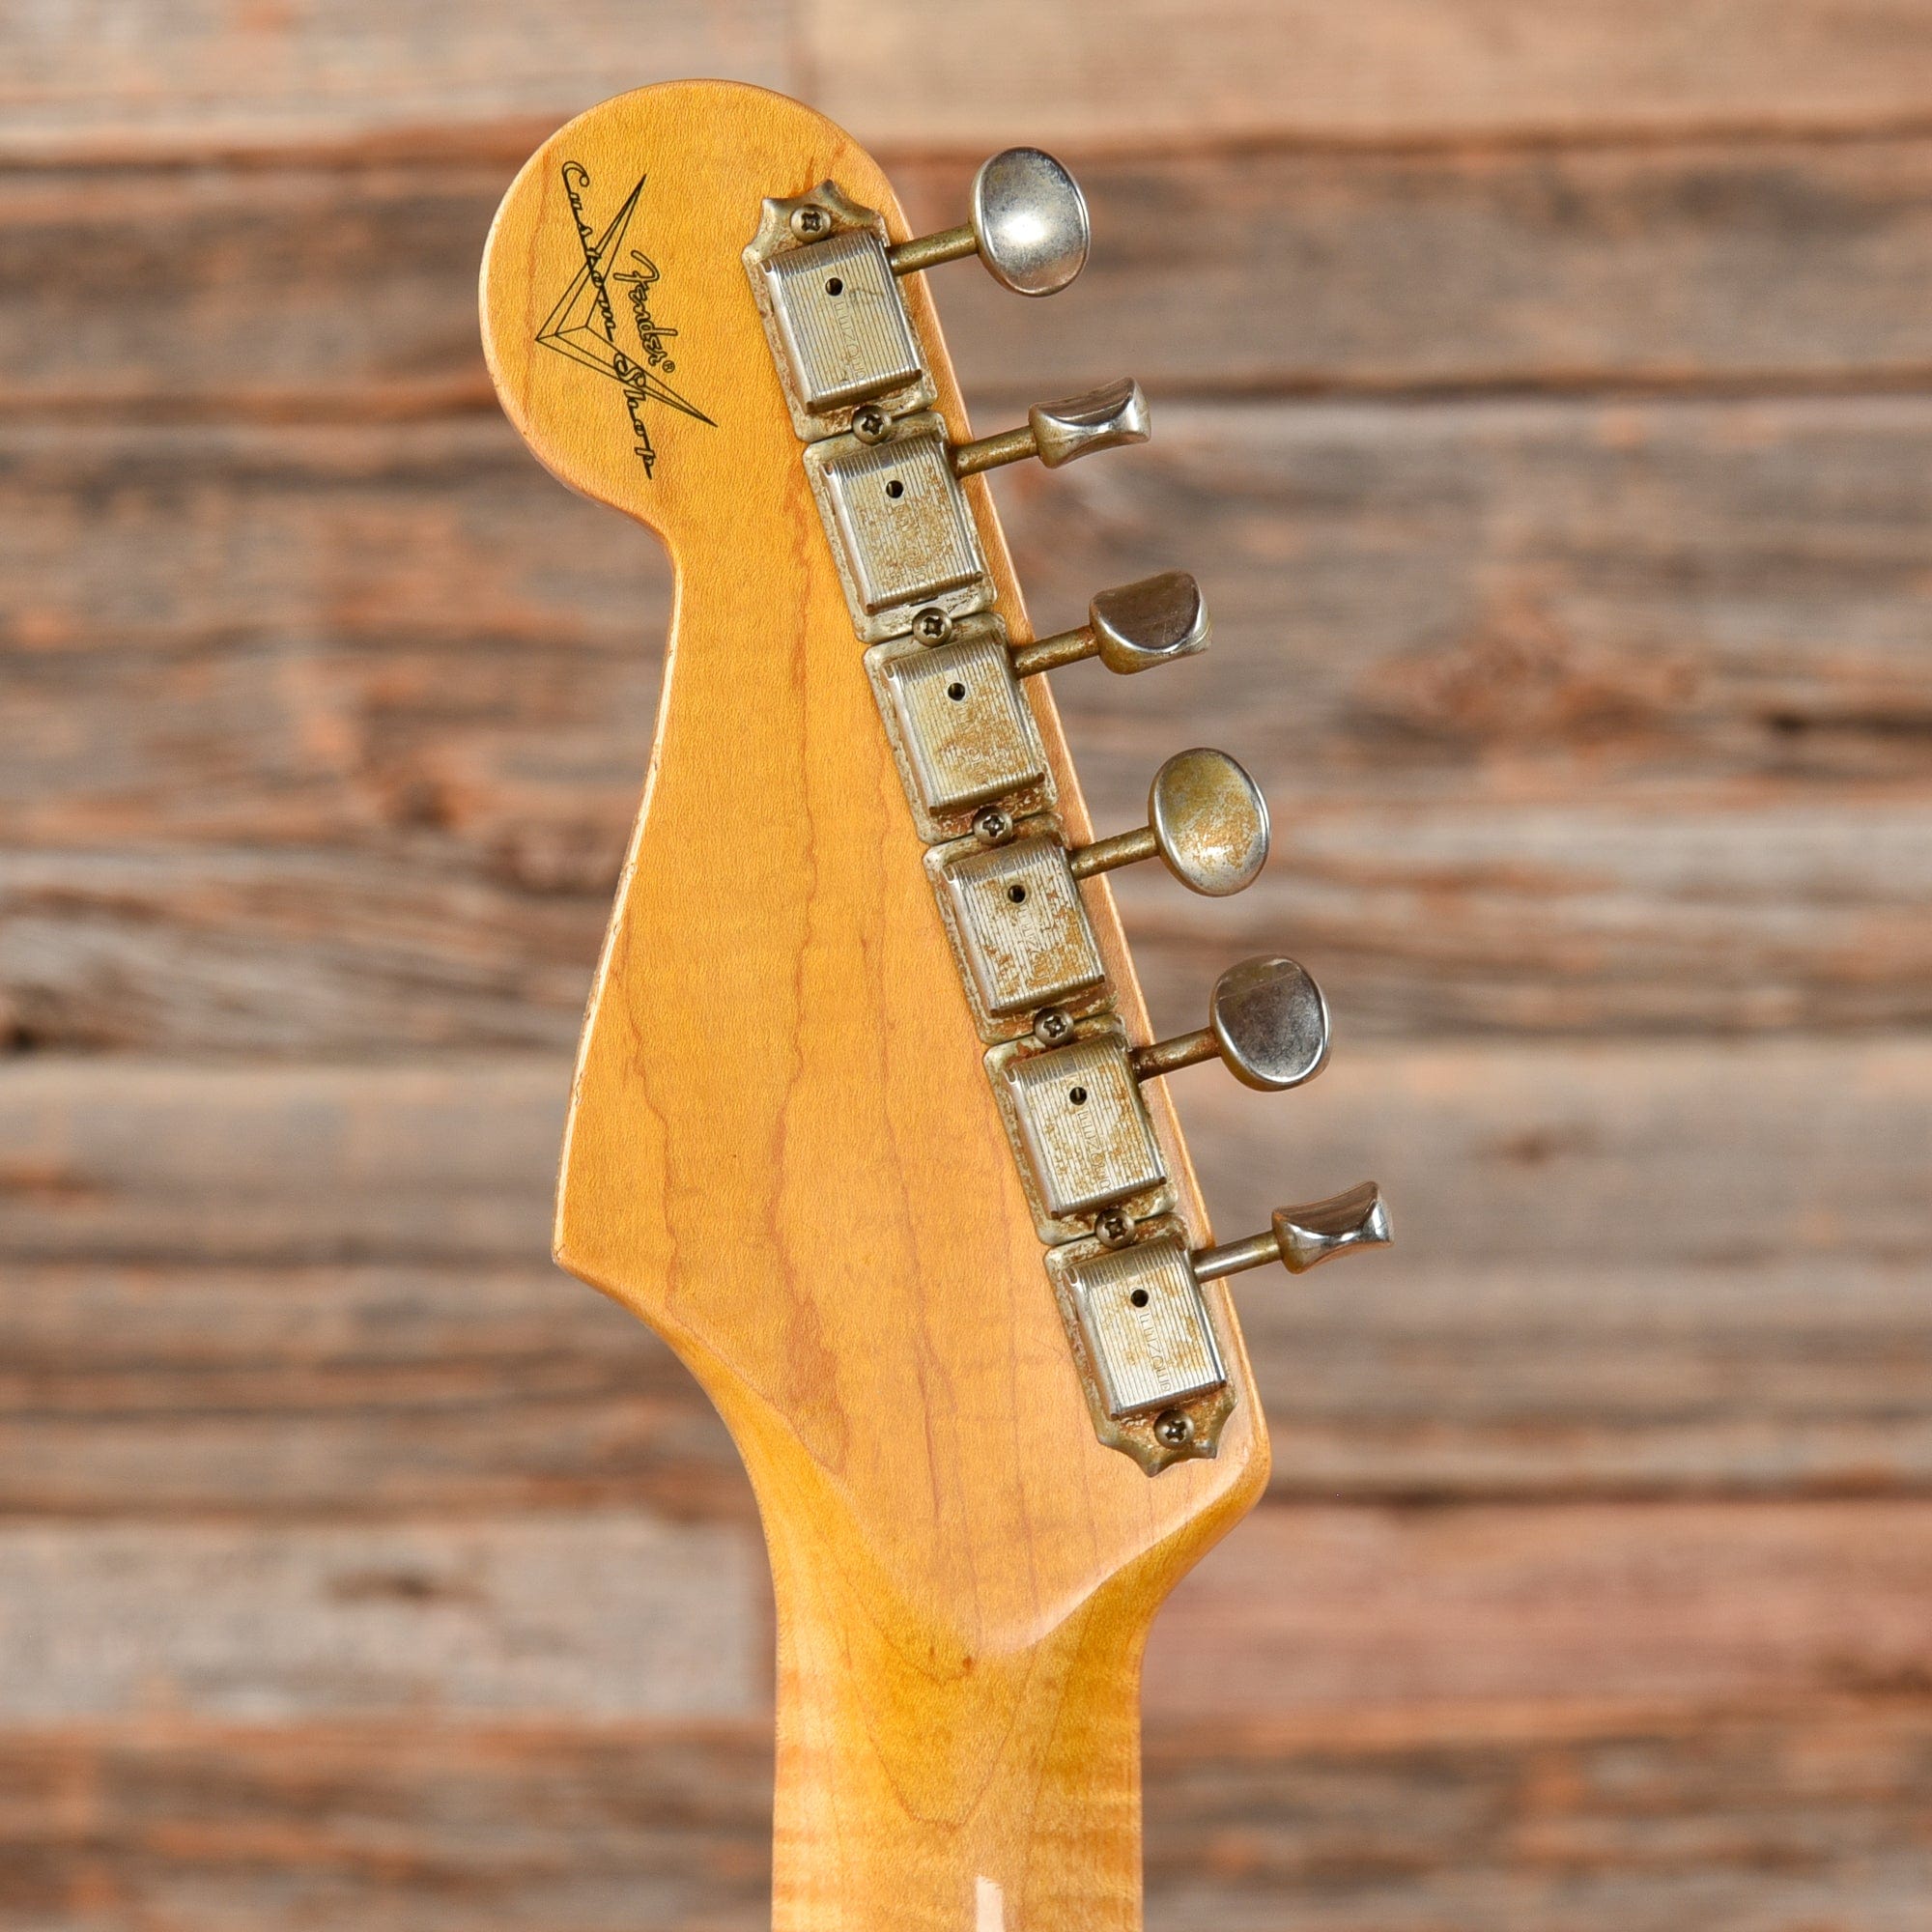 Fender Custom Shop '59 Reissue Stratocaster Journeyman Relic Charcoal Frost Metallic 2021 Electric Guitars / Solid Body